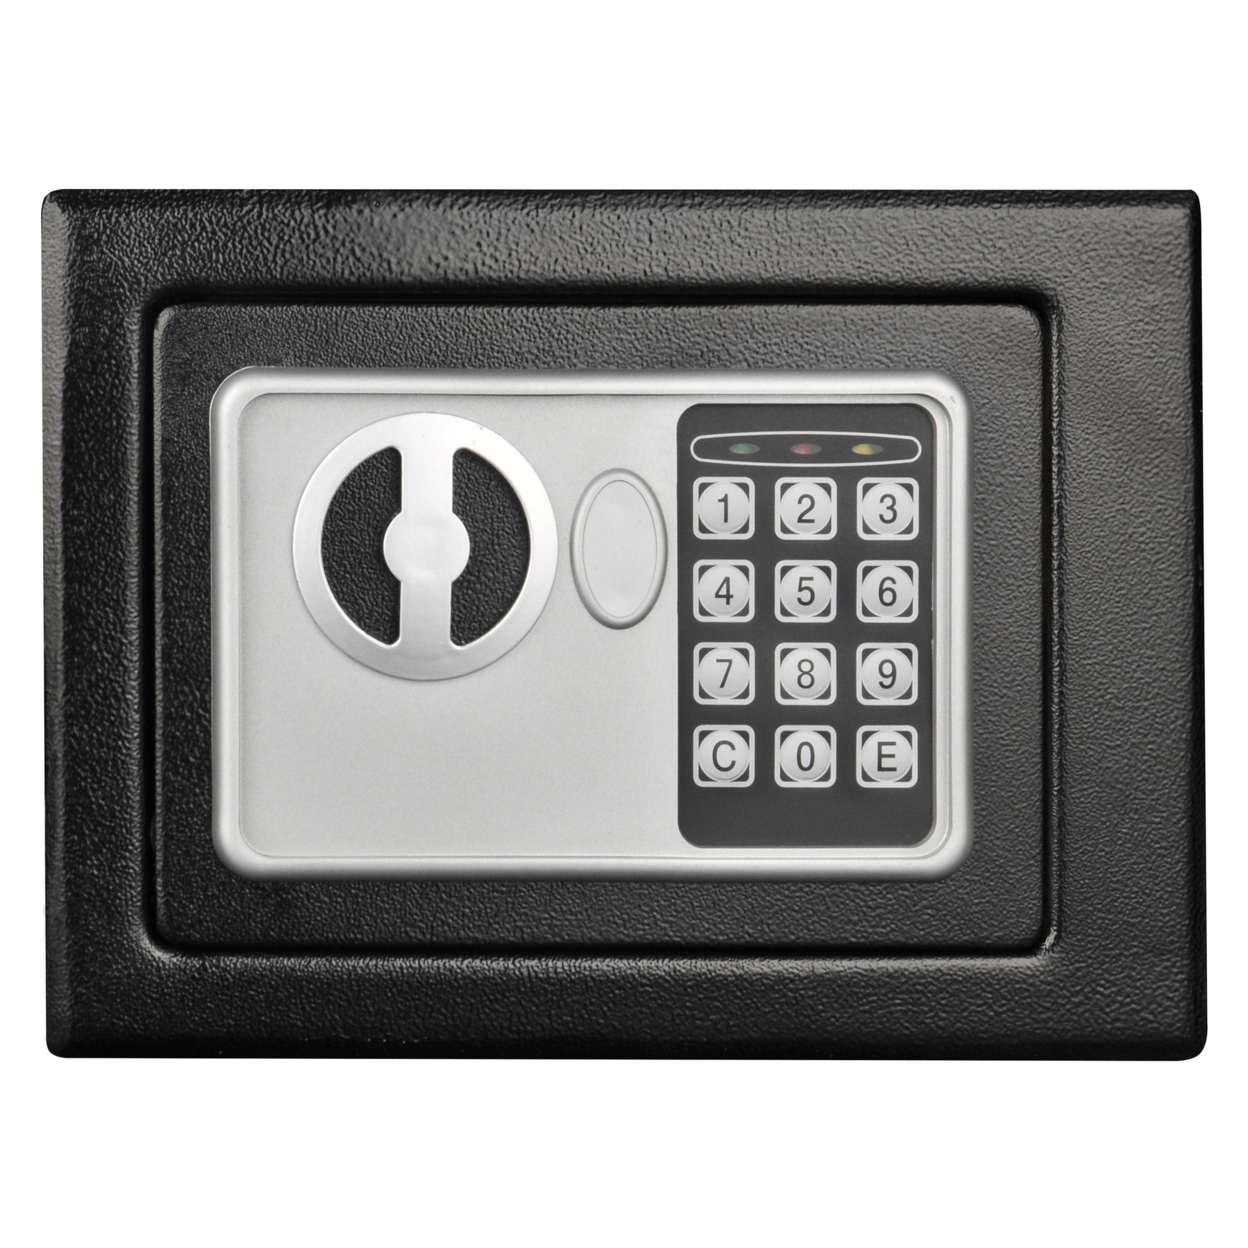 Digital Security Safe Box For Valuables Compact Waterproof And Fireproof Steel Lock Box With Electronic Combination Keypad